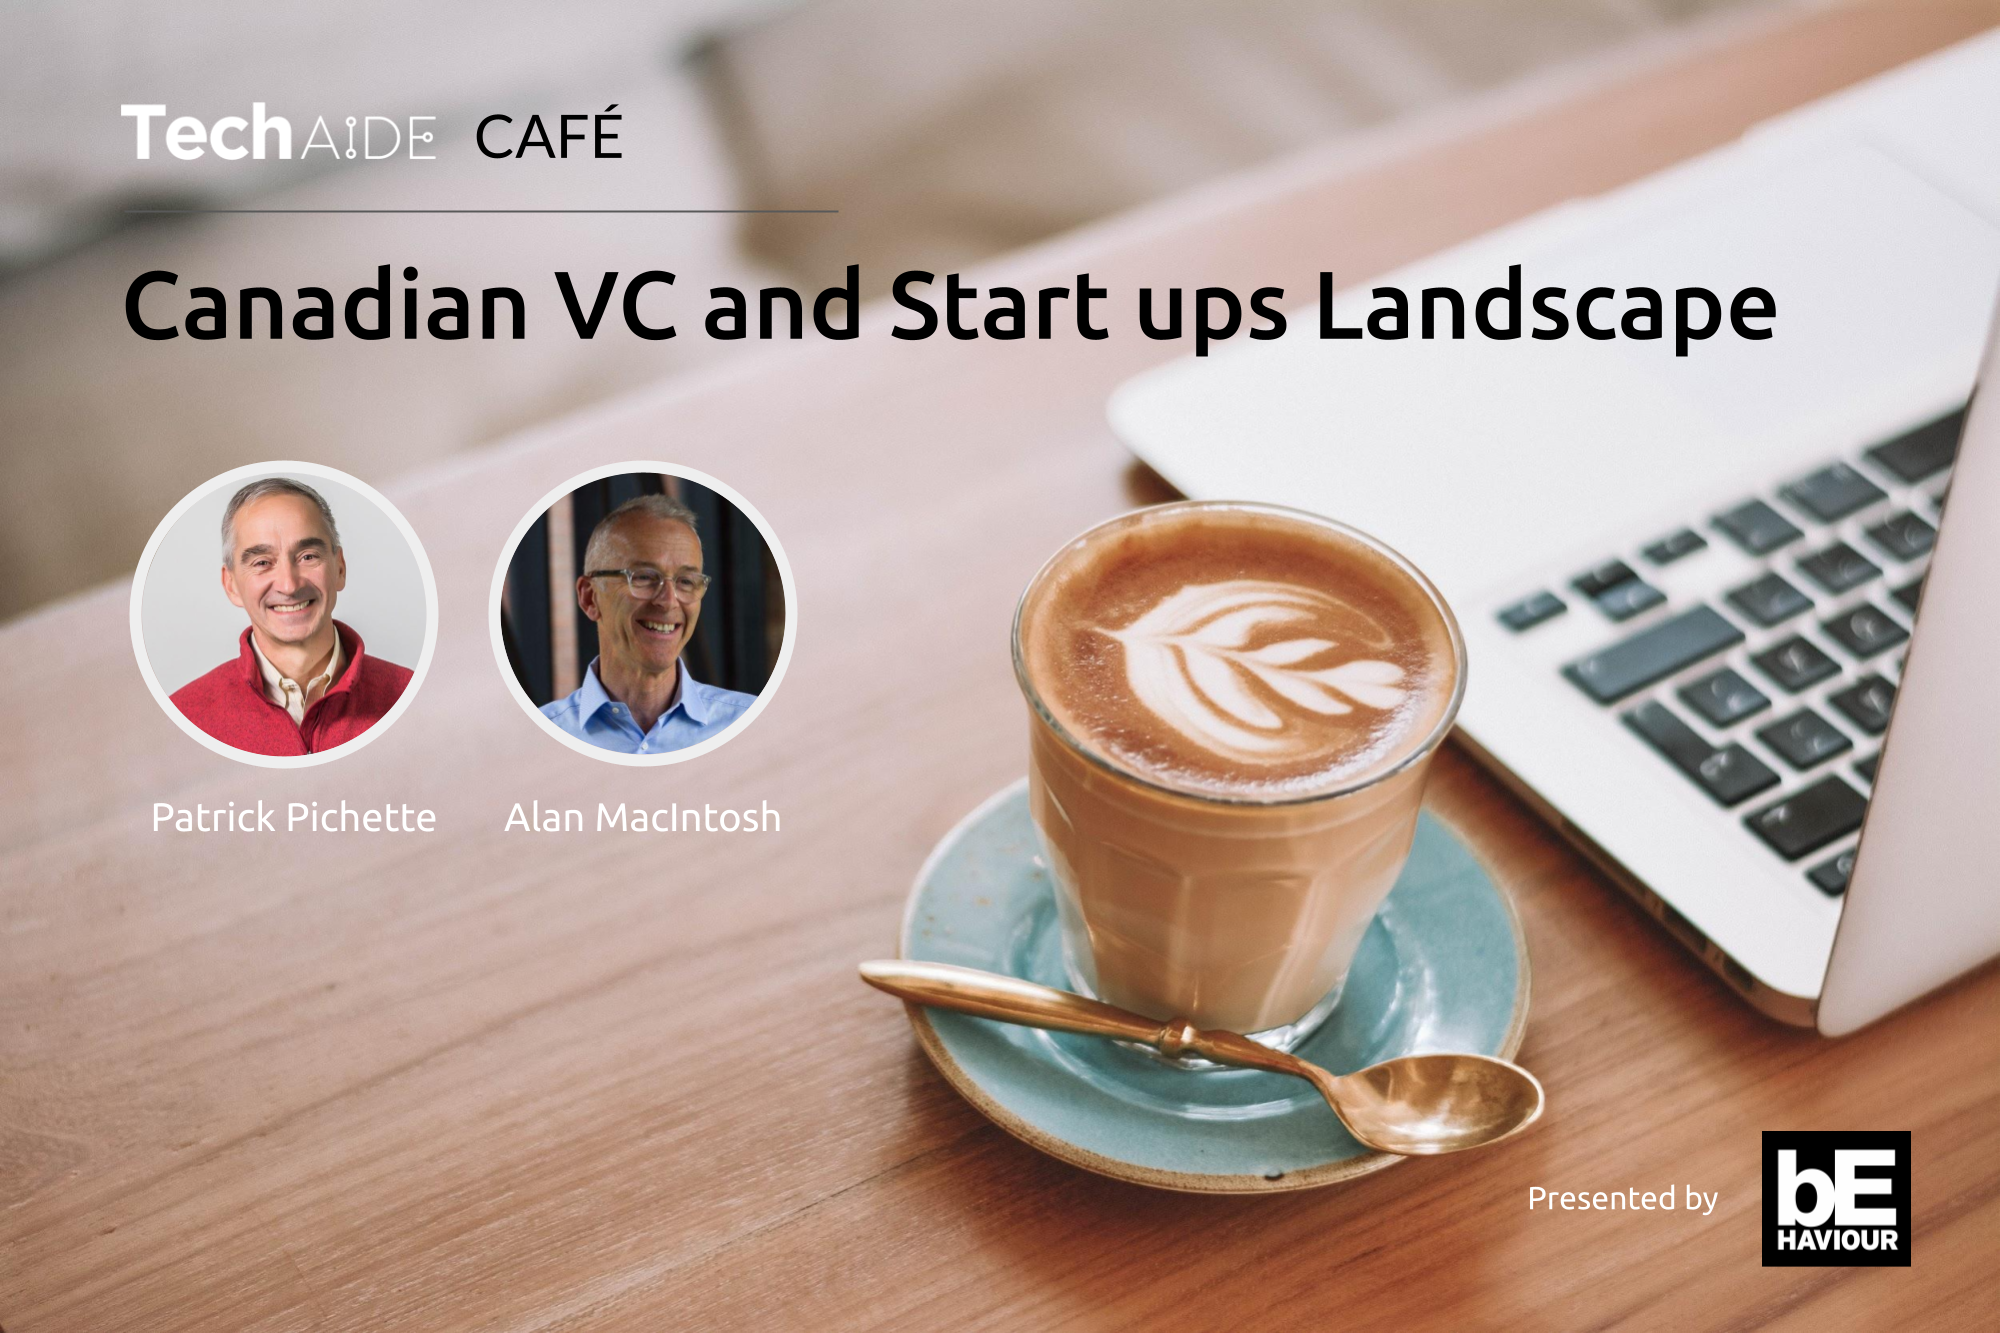 Techaide Café with Patrick Pichette on Canadian VC and Start ups Landscape